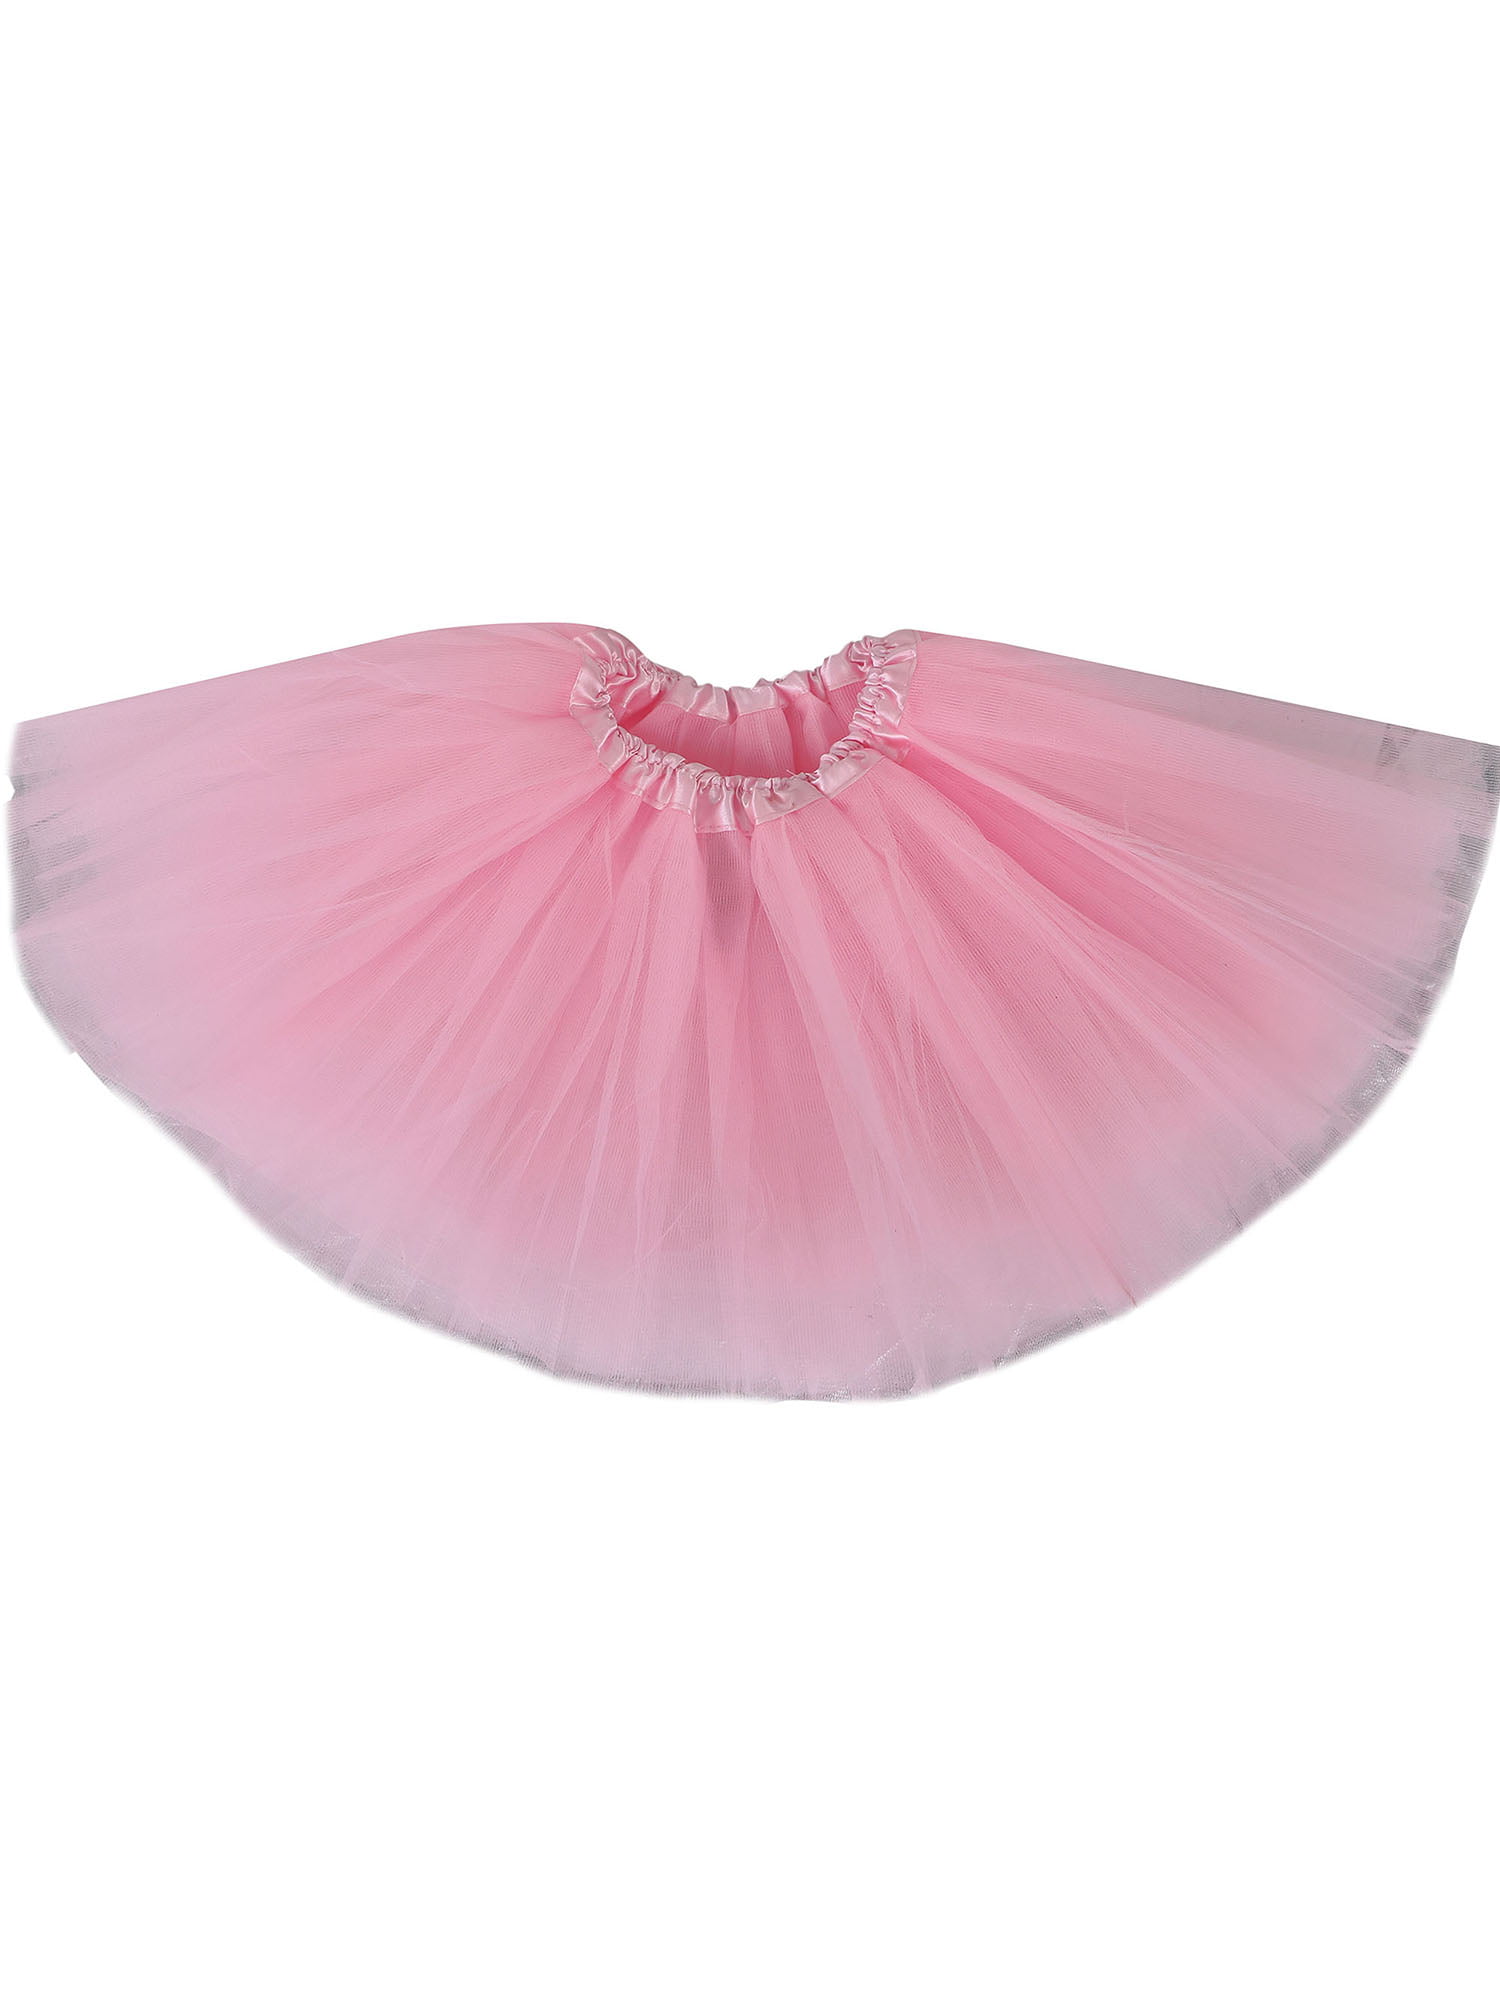 Simplicity Baby Classic 5 layered Tulle Tutu Skirts Cosplay Dress ...